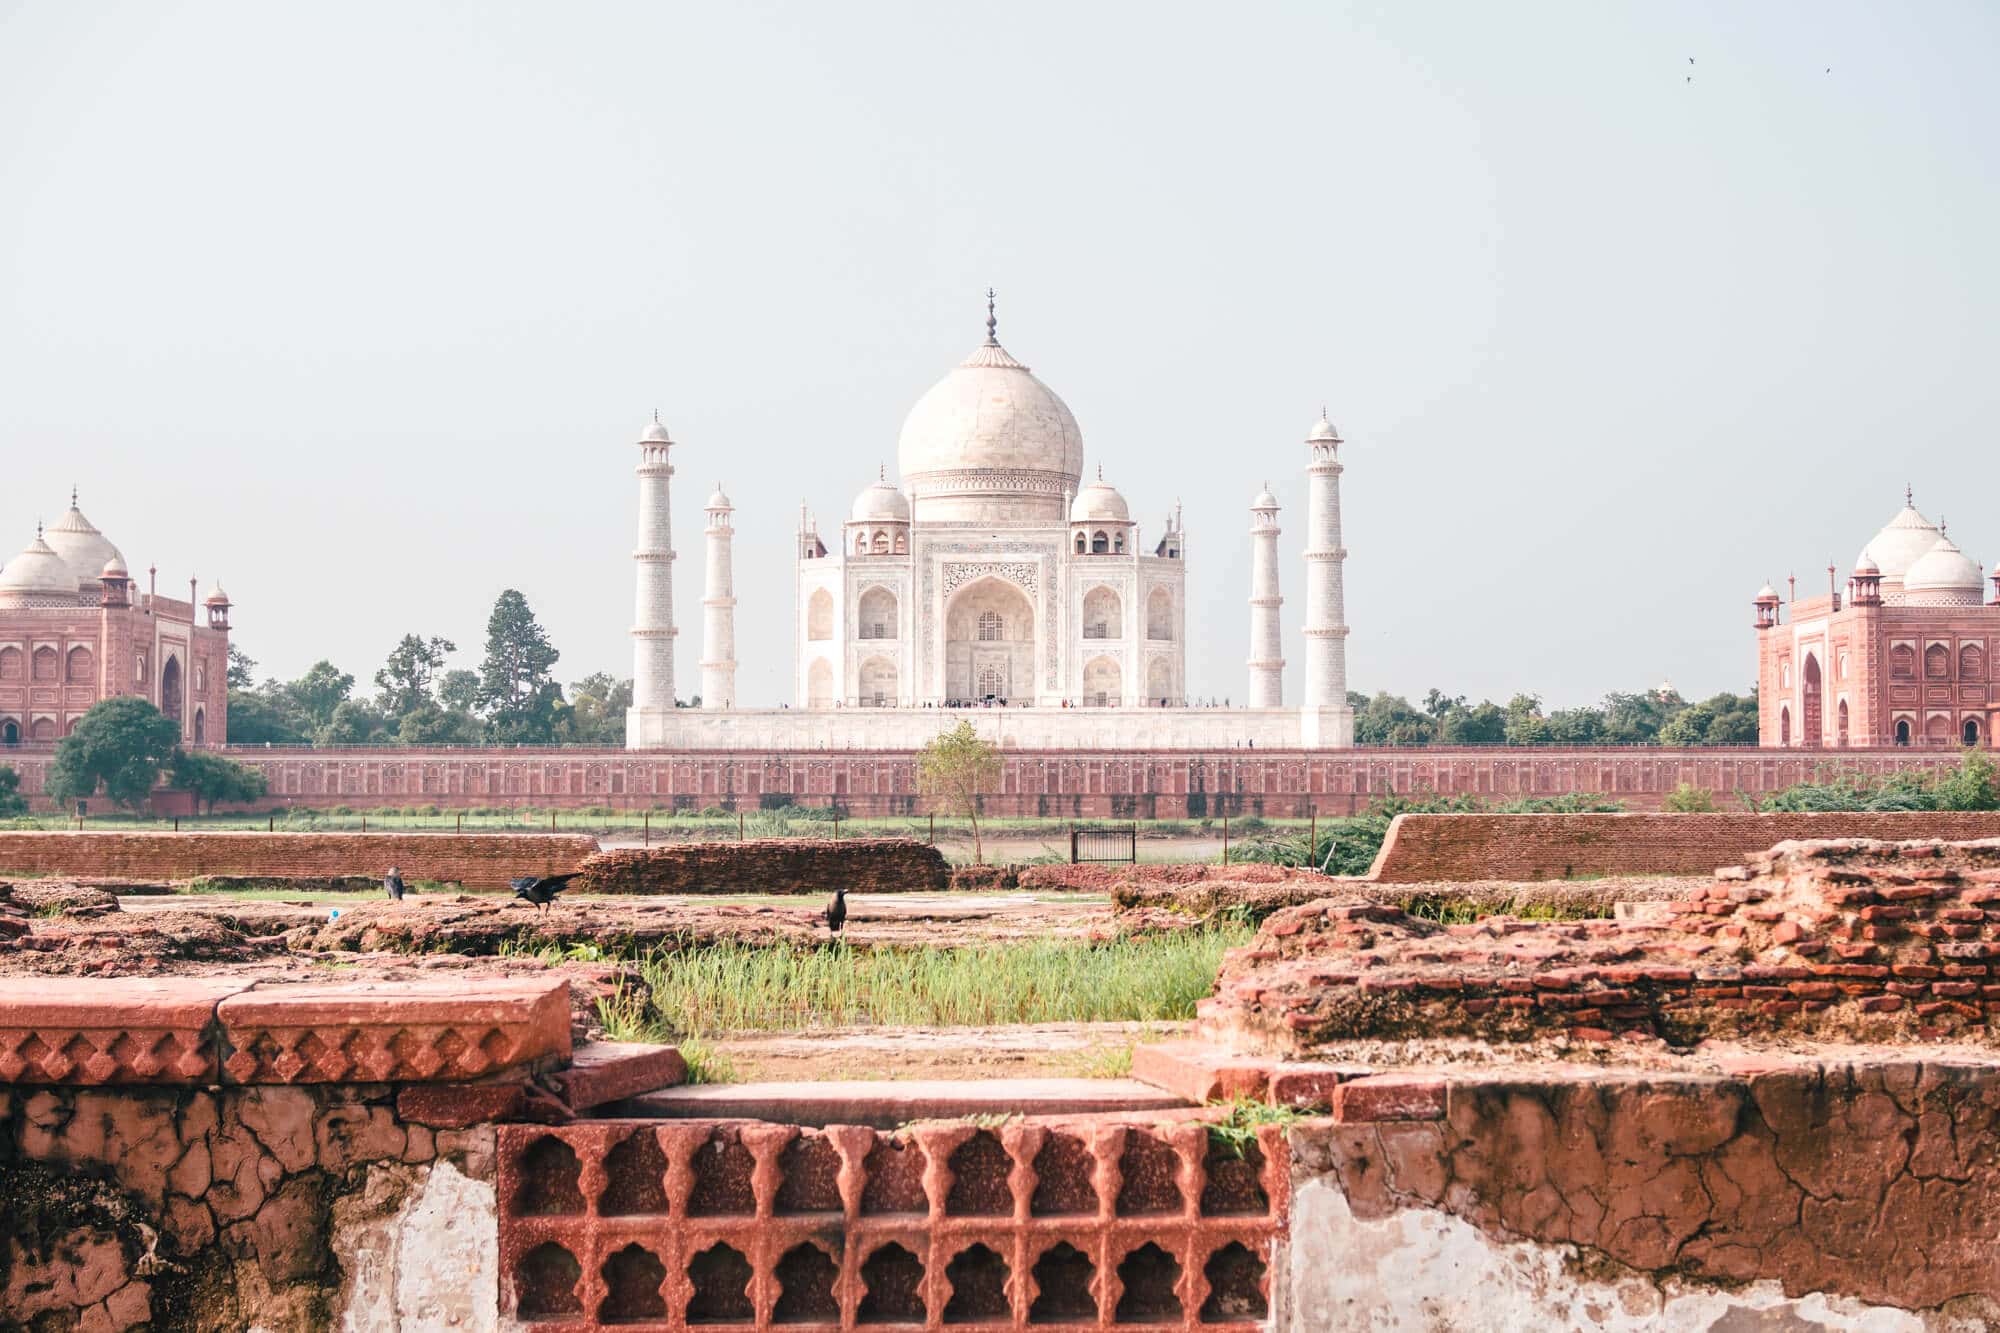 Mehtab Bagh or Moonlight Garden is the best place to view the Taj Mahal in all of Agra, India.